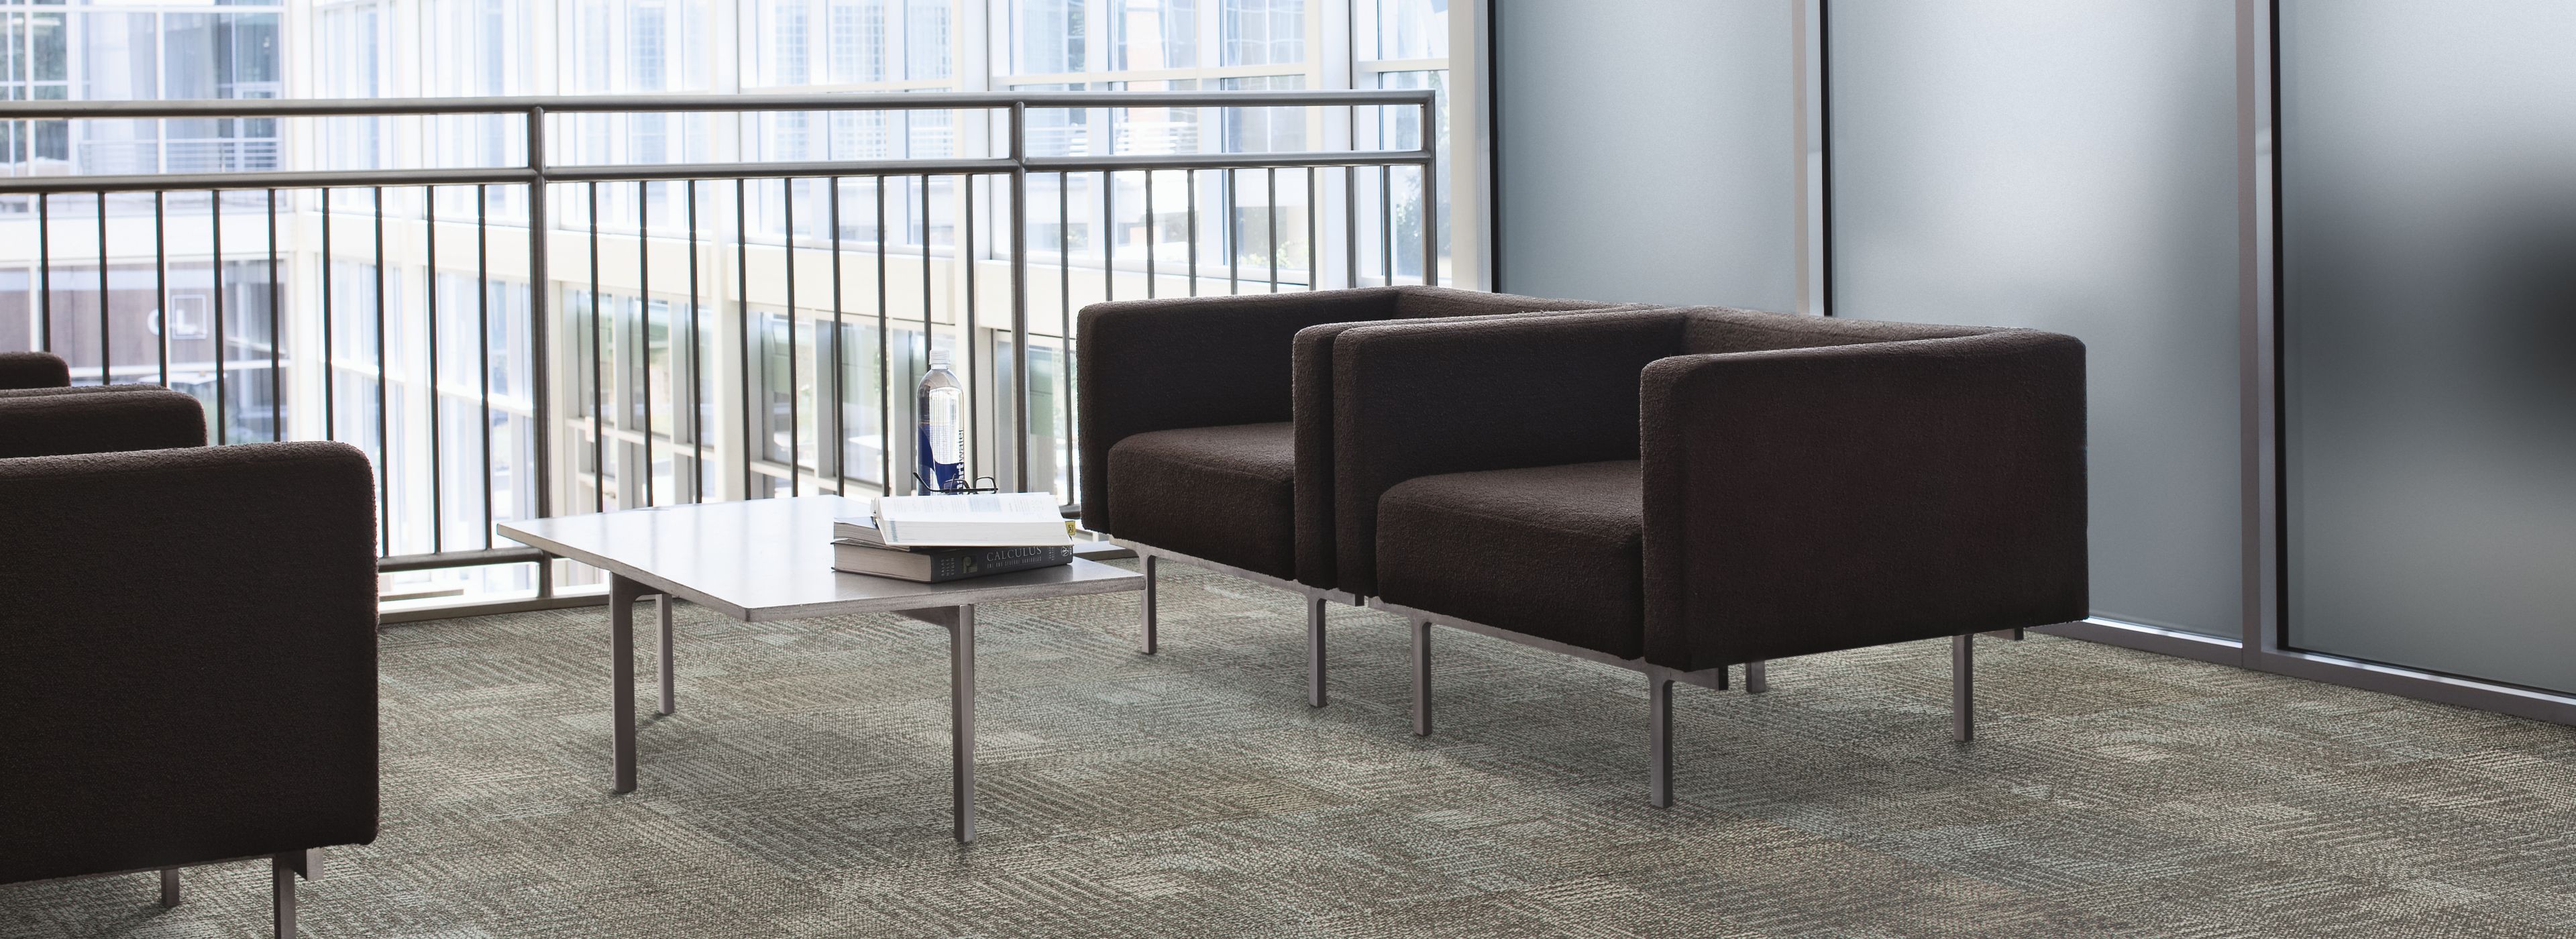 Interface Work carpet tile in lobby setting with couch and chairs numéro d’image 1